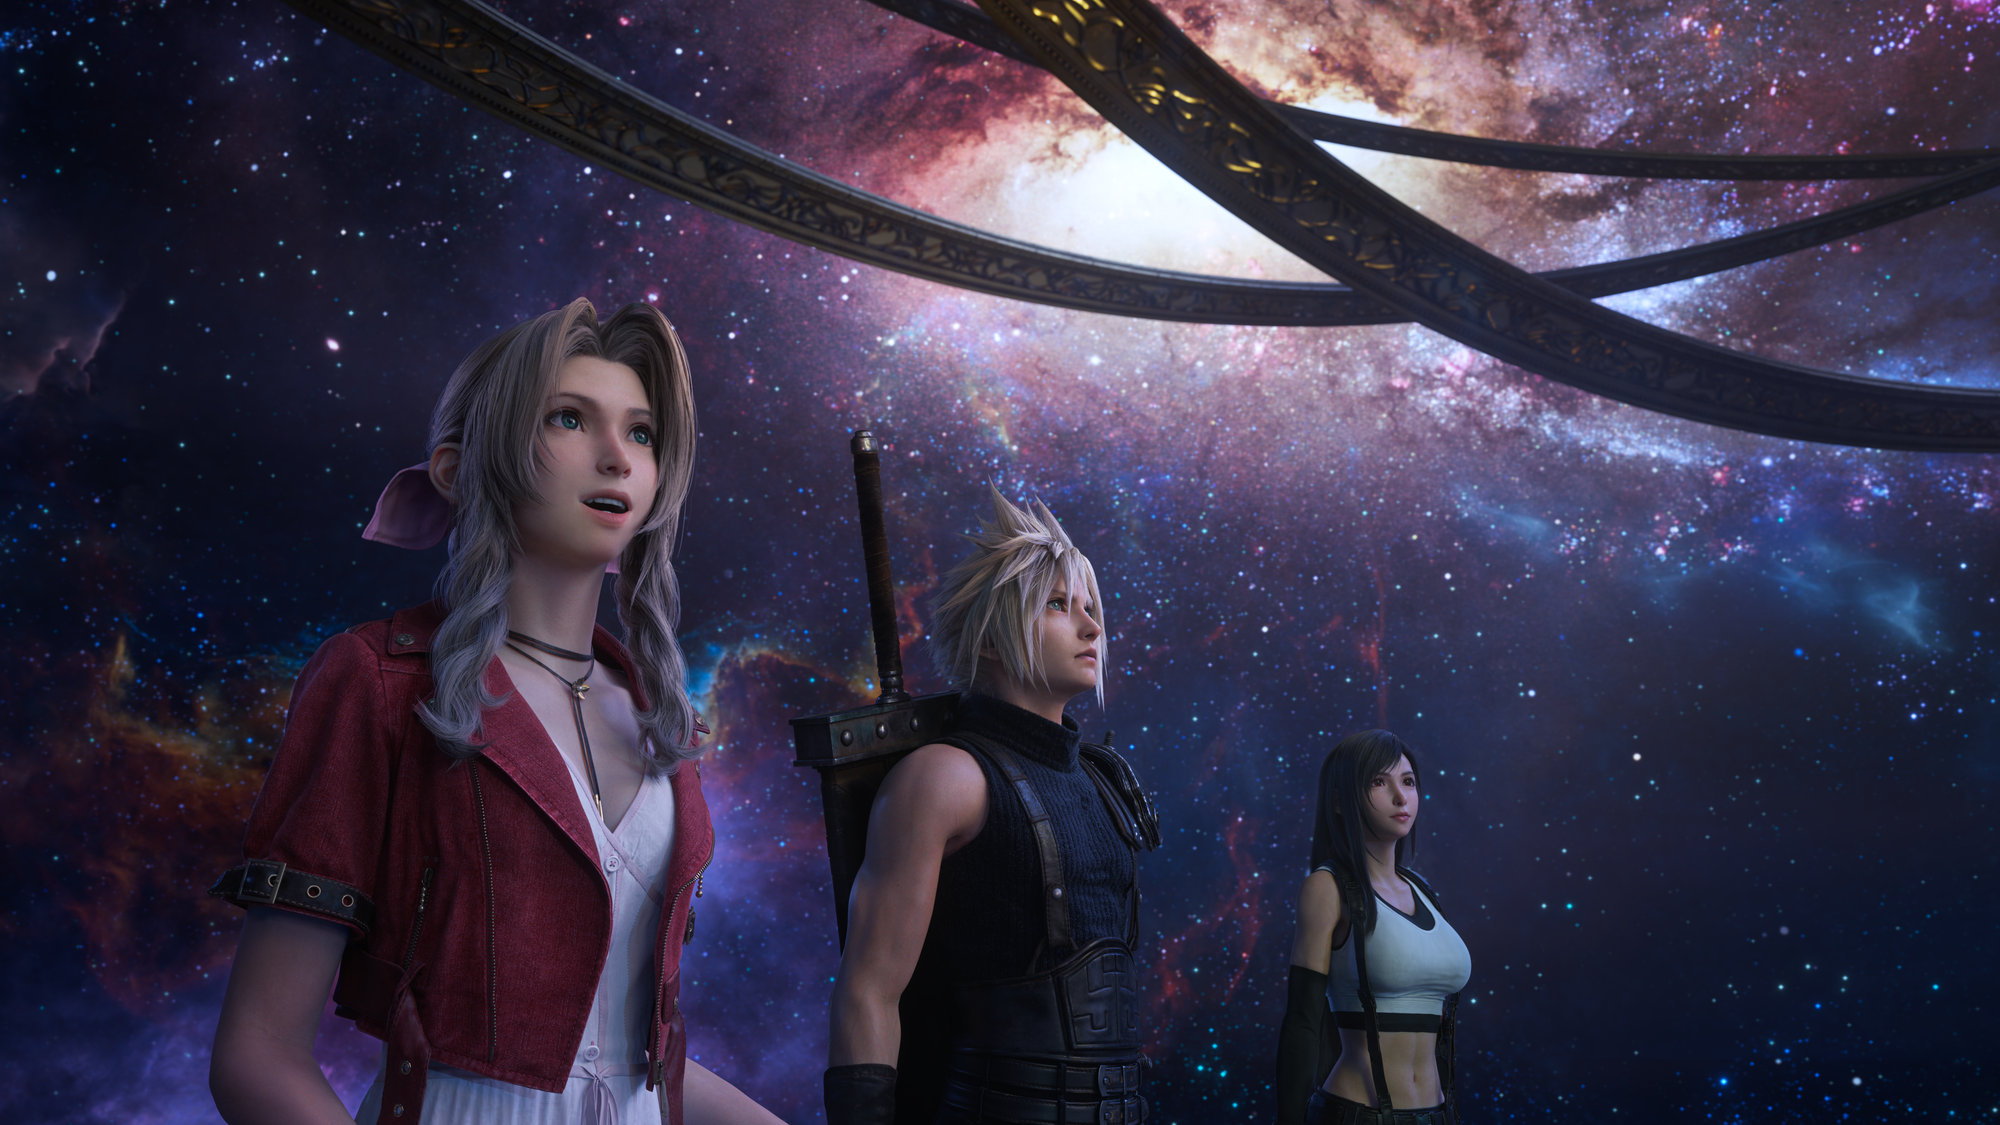 Aerith, Cloud, and Tifa look up at a wondrous night sky standing beneath some kind of odd device.